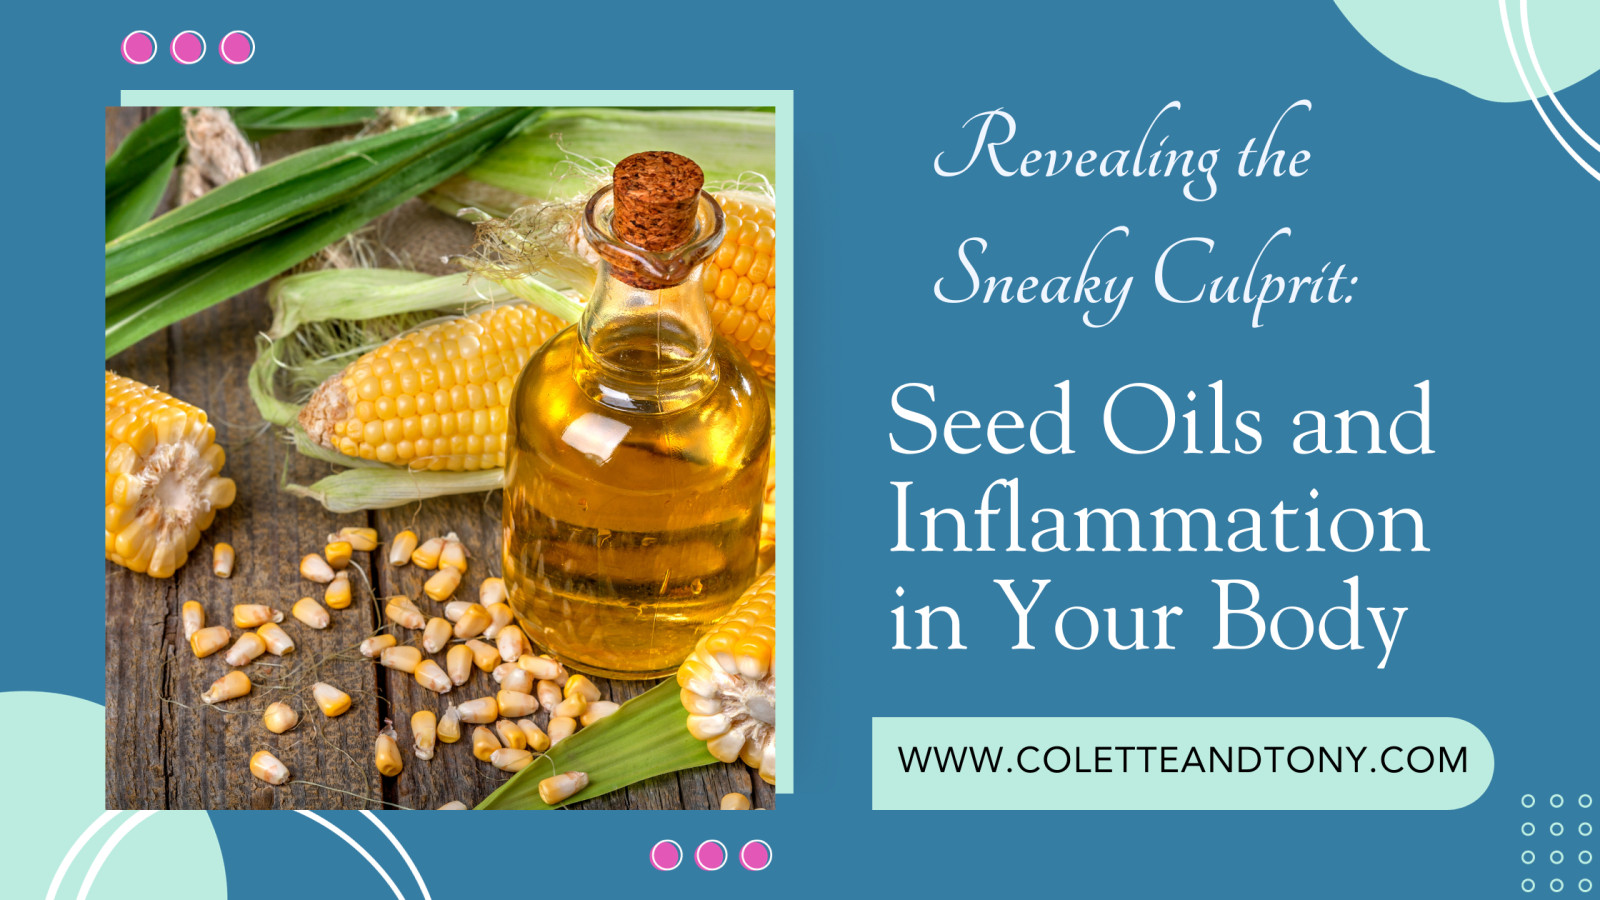 THE SNEAKY CULPRIT: SEED OILS AND INFLAMMATION IN YOUR BODY